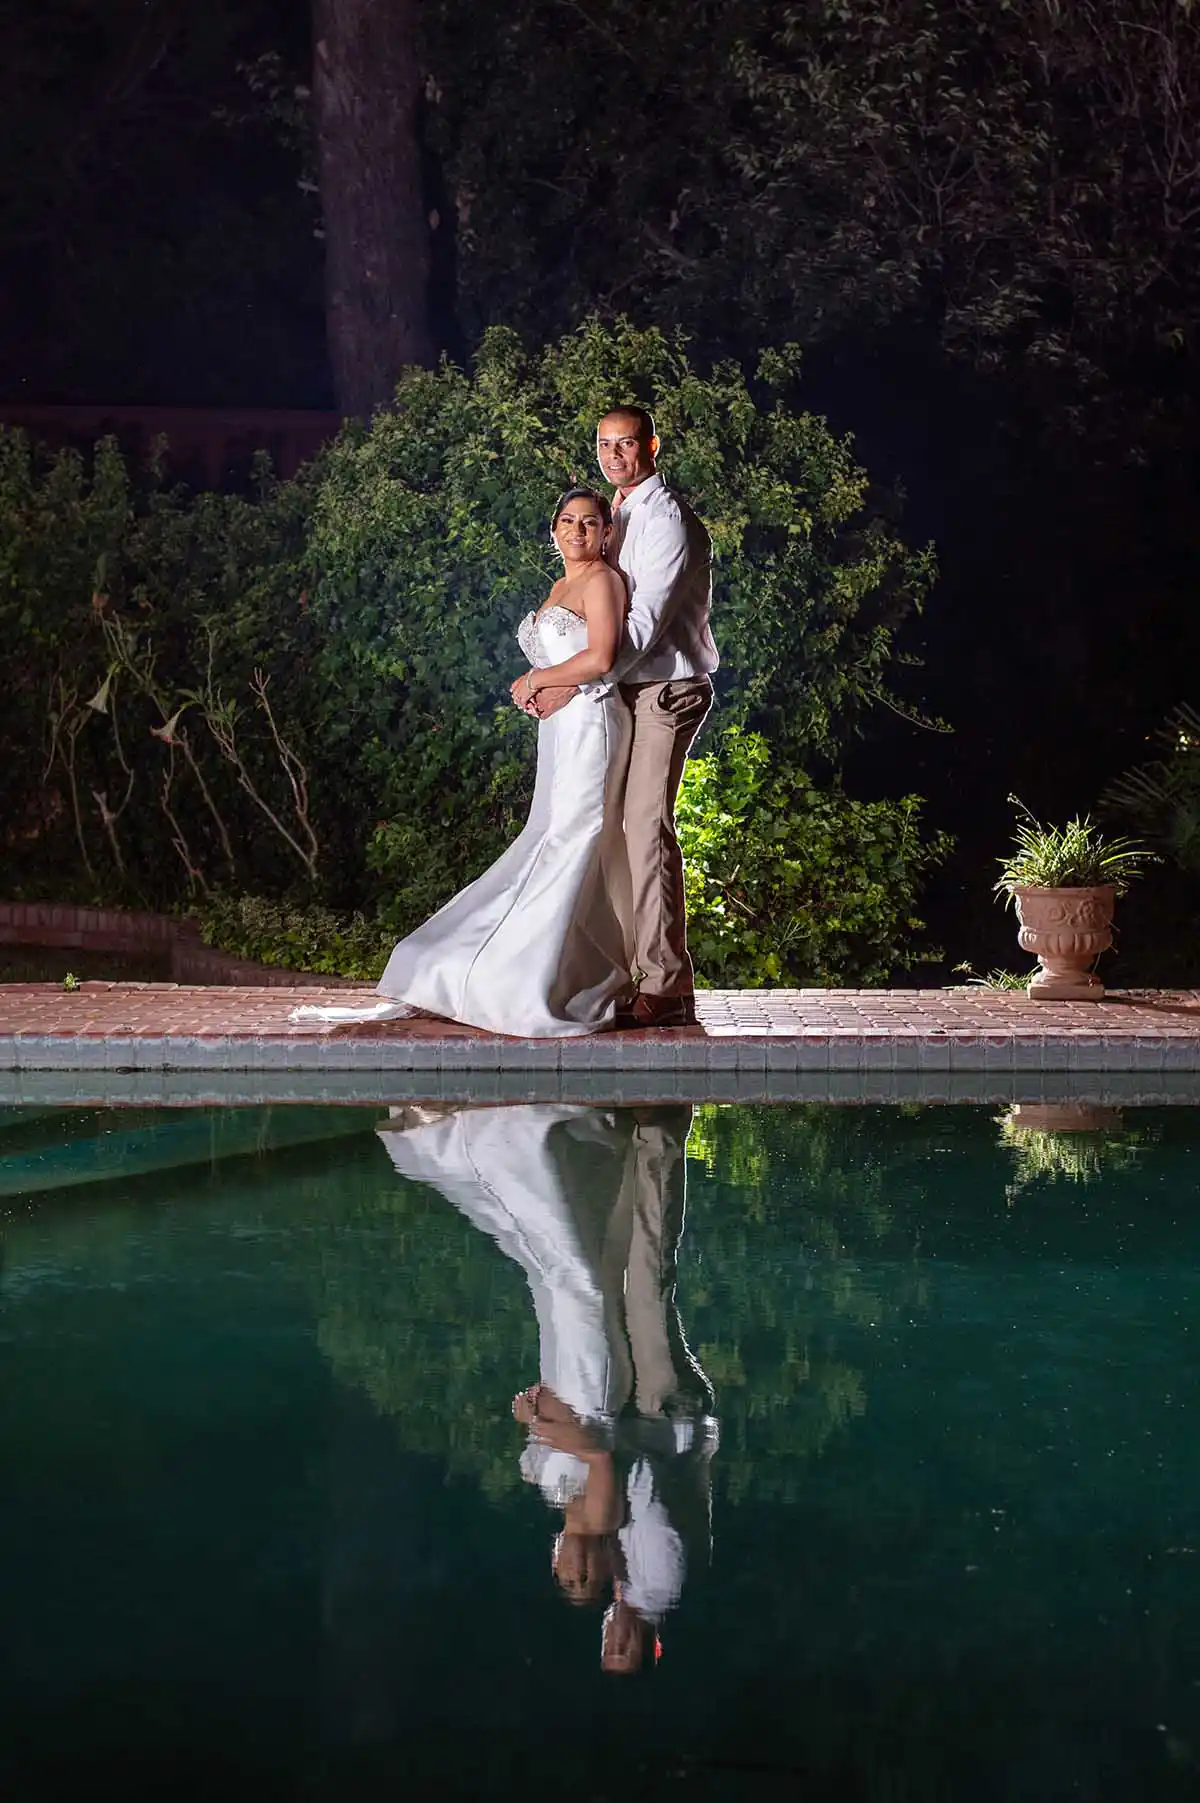 wedding photography bride and groom Bloemfontein leopards and lace mudboots photography